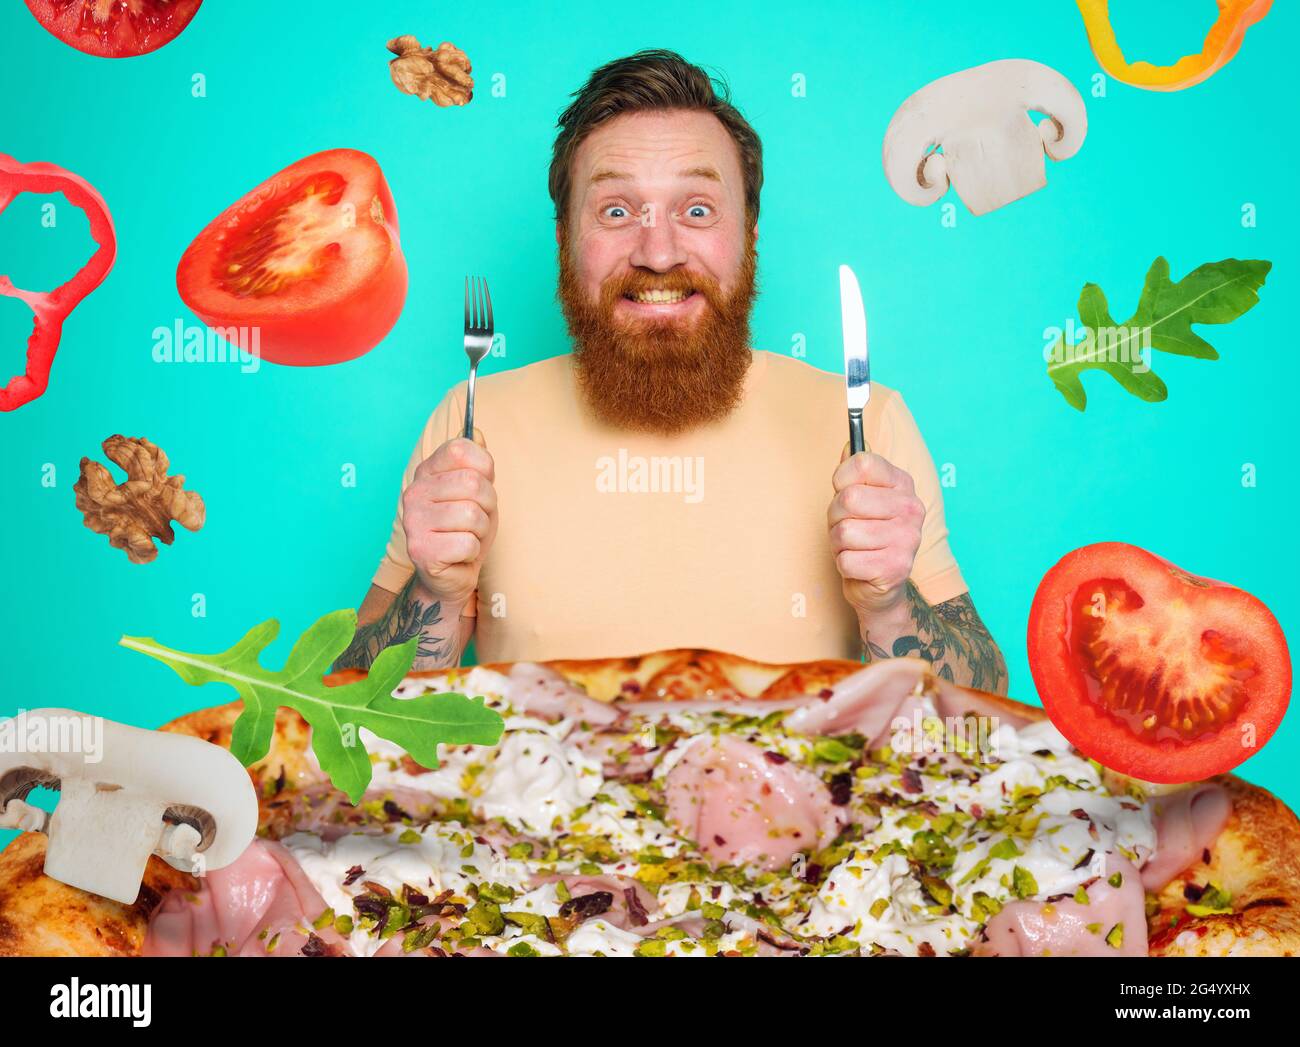 Man with beard and tattoos is ready to eat a big pizza Stock Photo